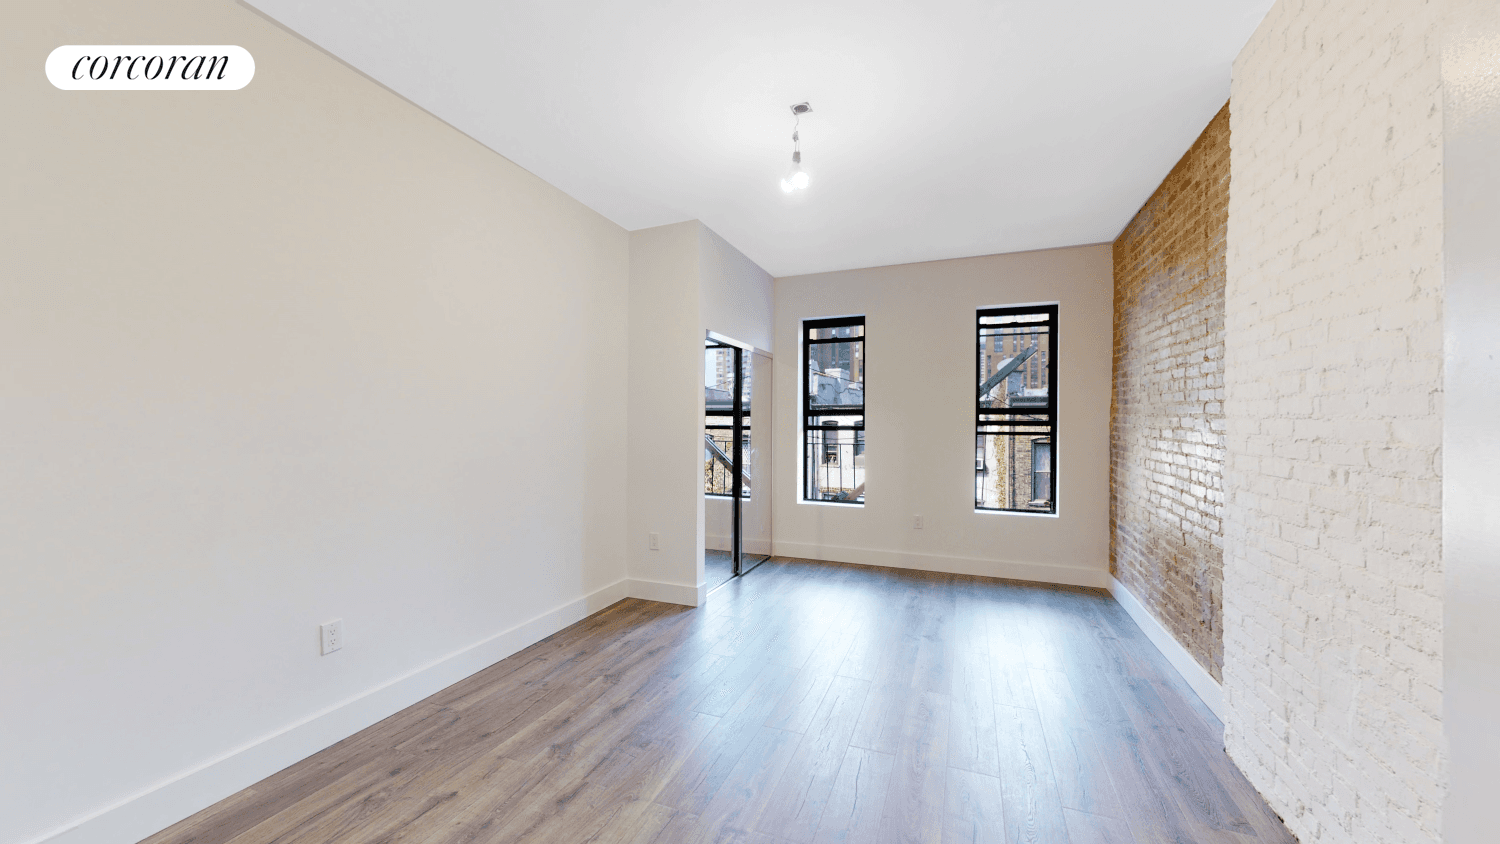 Beautifully gut renovated apartment centrally located in the heart of Yorkville, just 5 blocks to Central Park and Museum Mile home to world class museums along 5th Avenue.